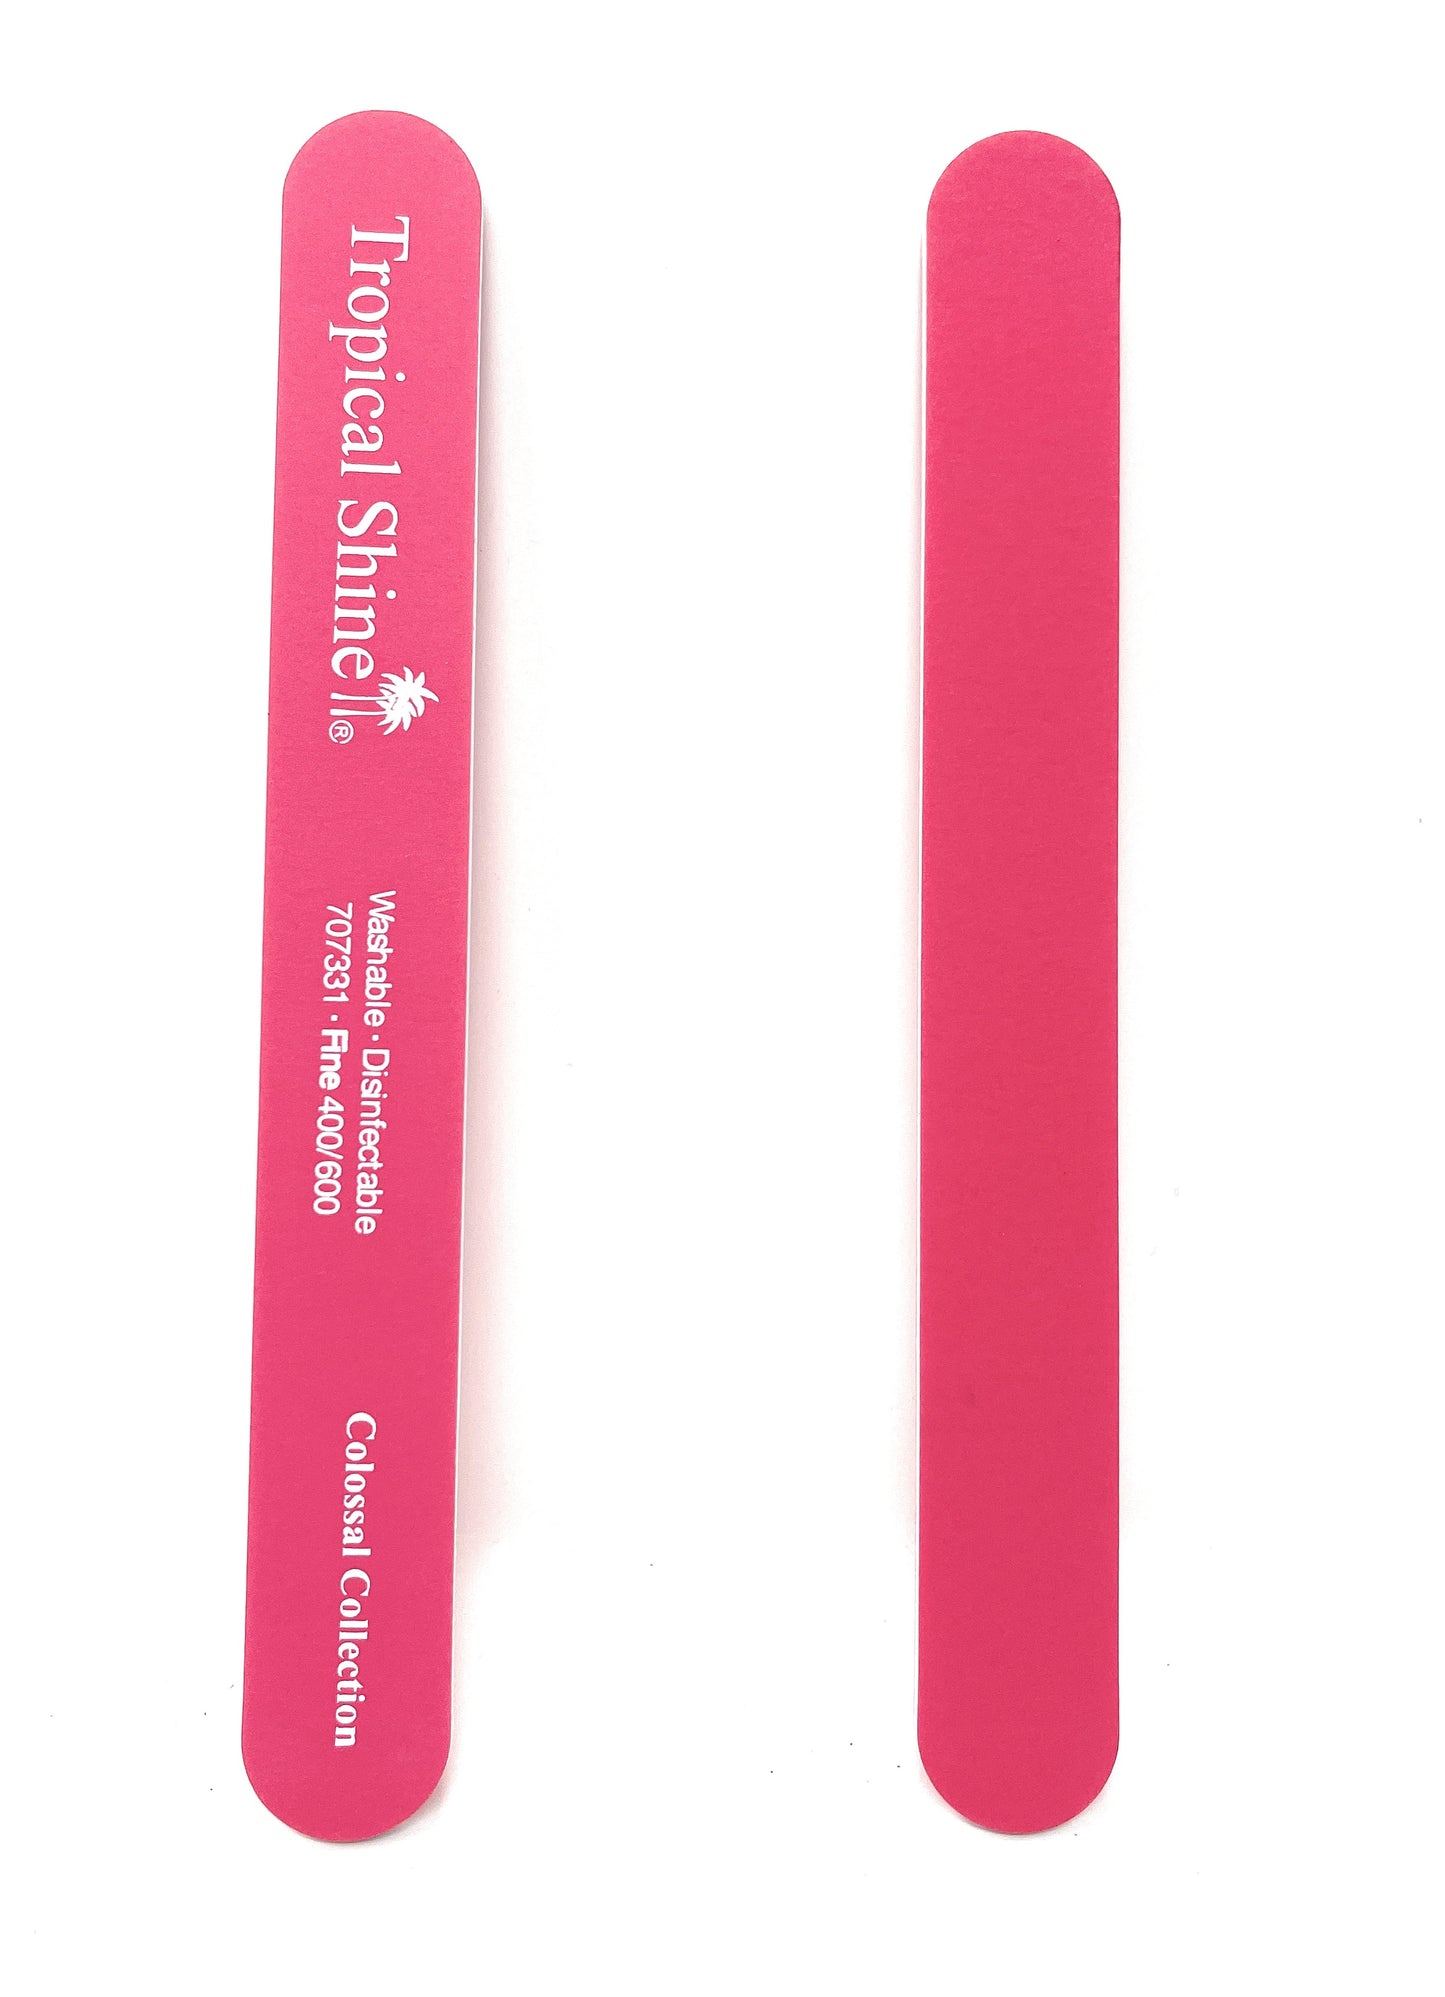 Tropical Shine Colossal Nail File 400/ 600 Fine & Extra Fine Grits Dual Sided Emery Boards Cushion Salon Board Pink 3 Pcs.